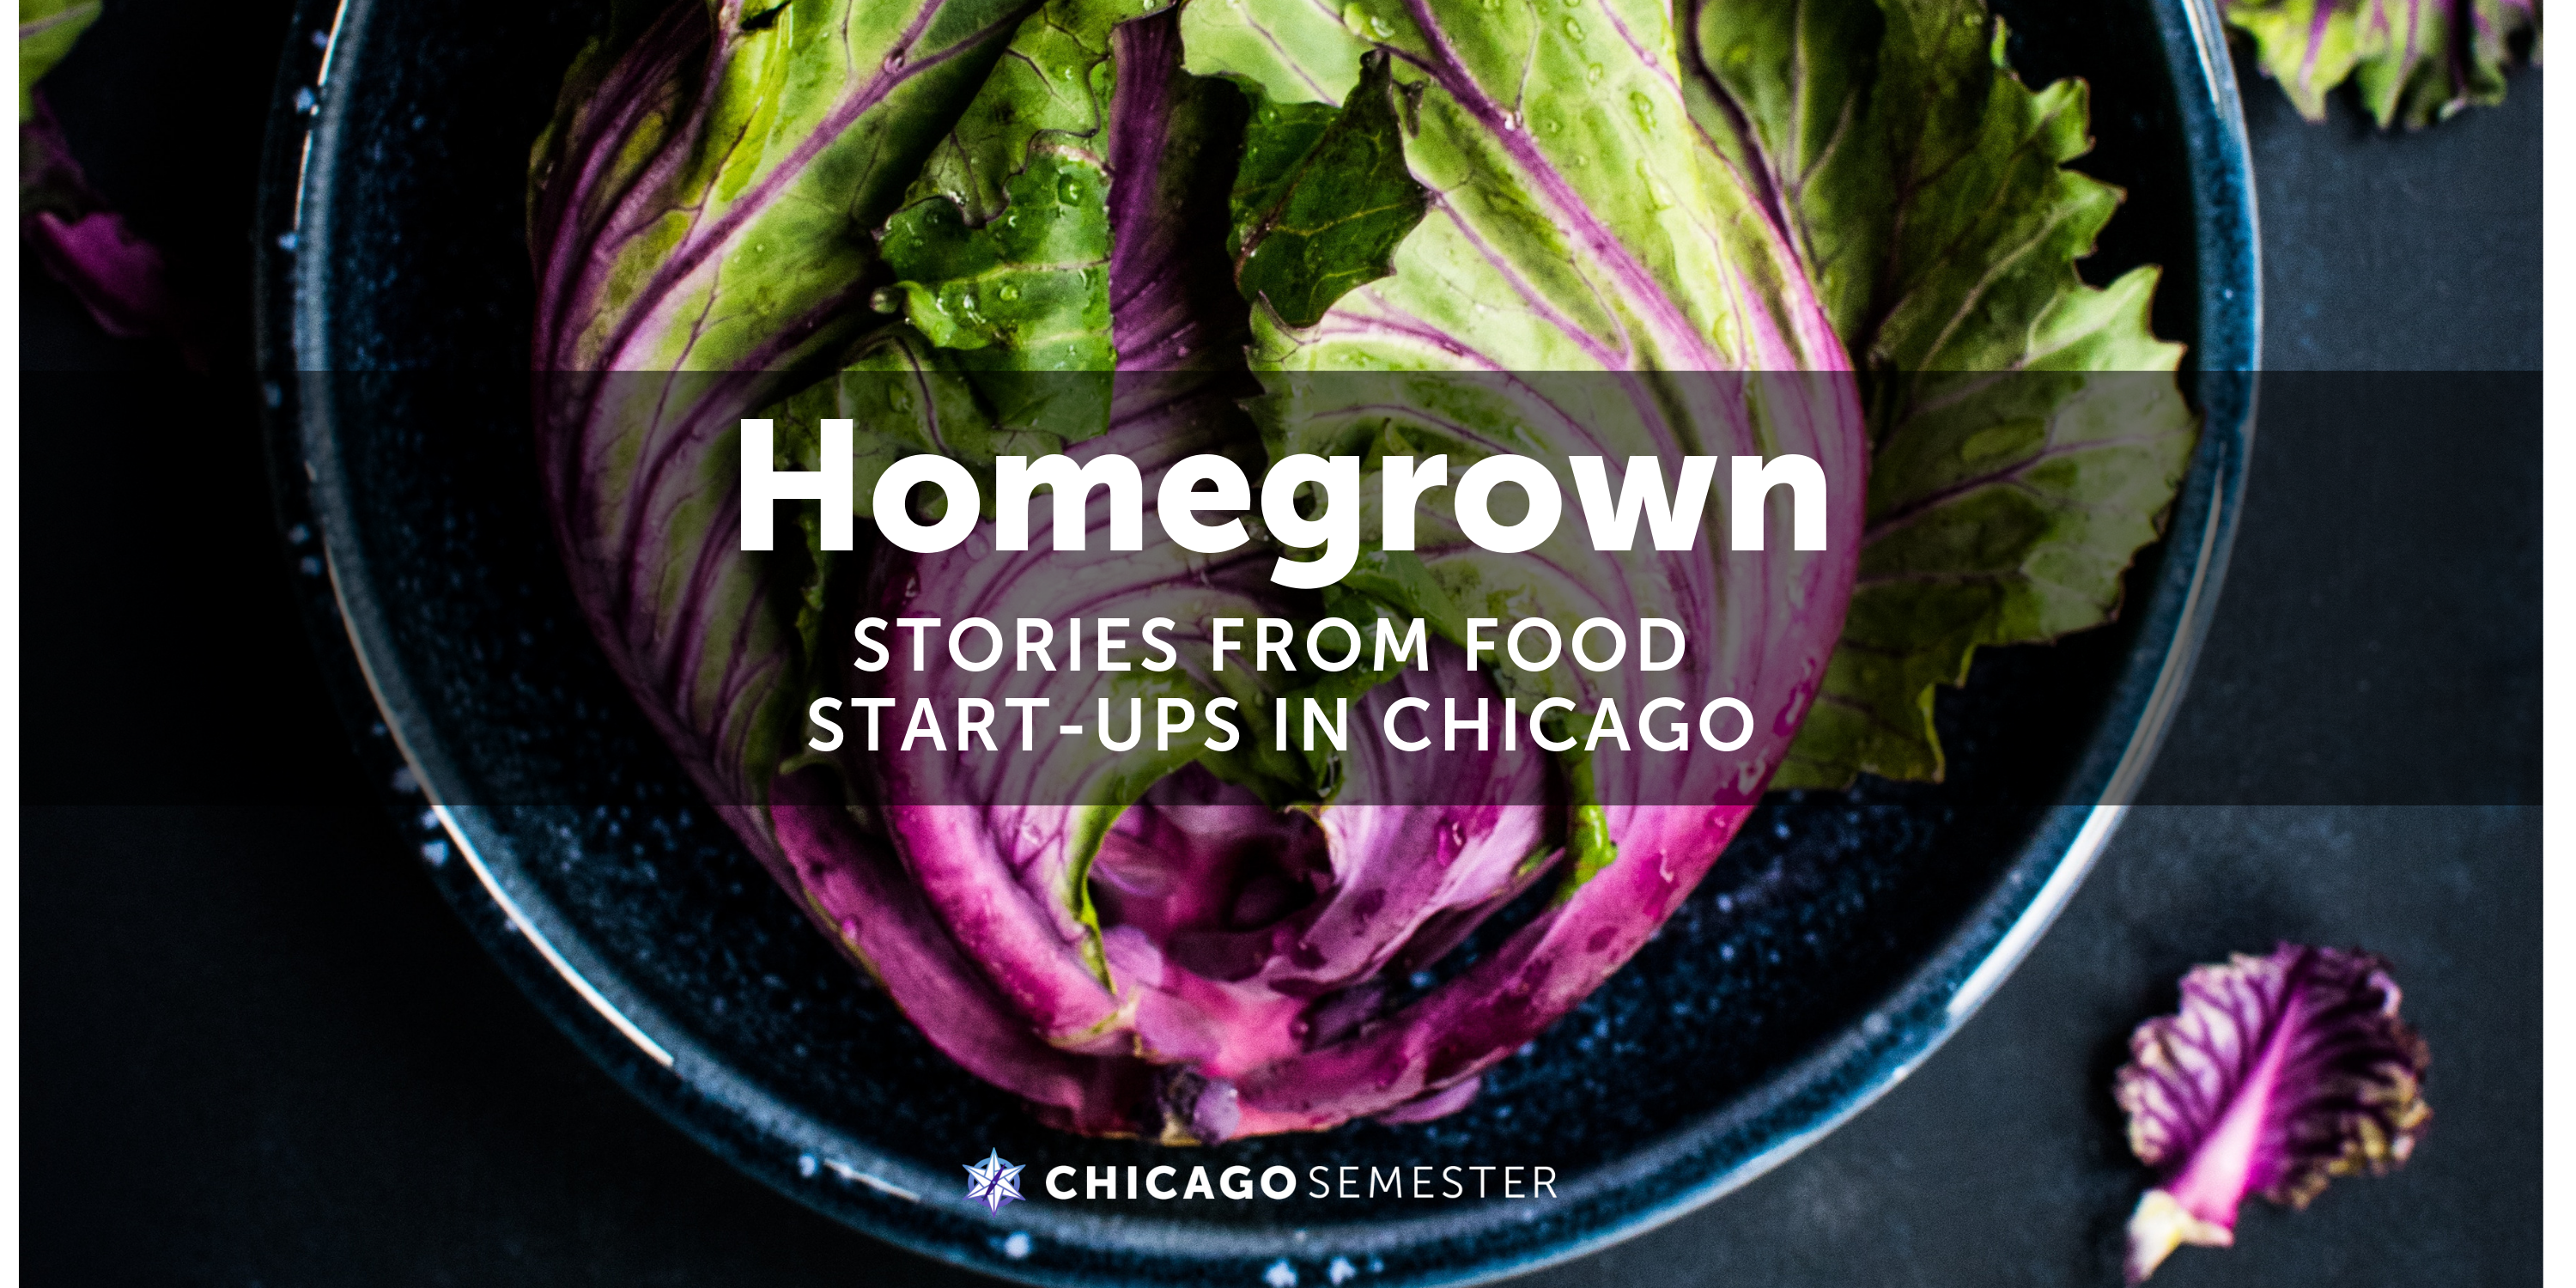 Homegrown: Stories from Food Start-Ups in Chicago